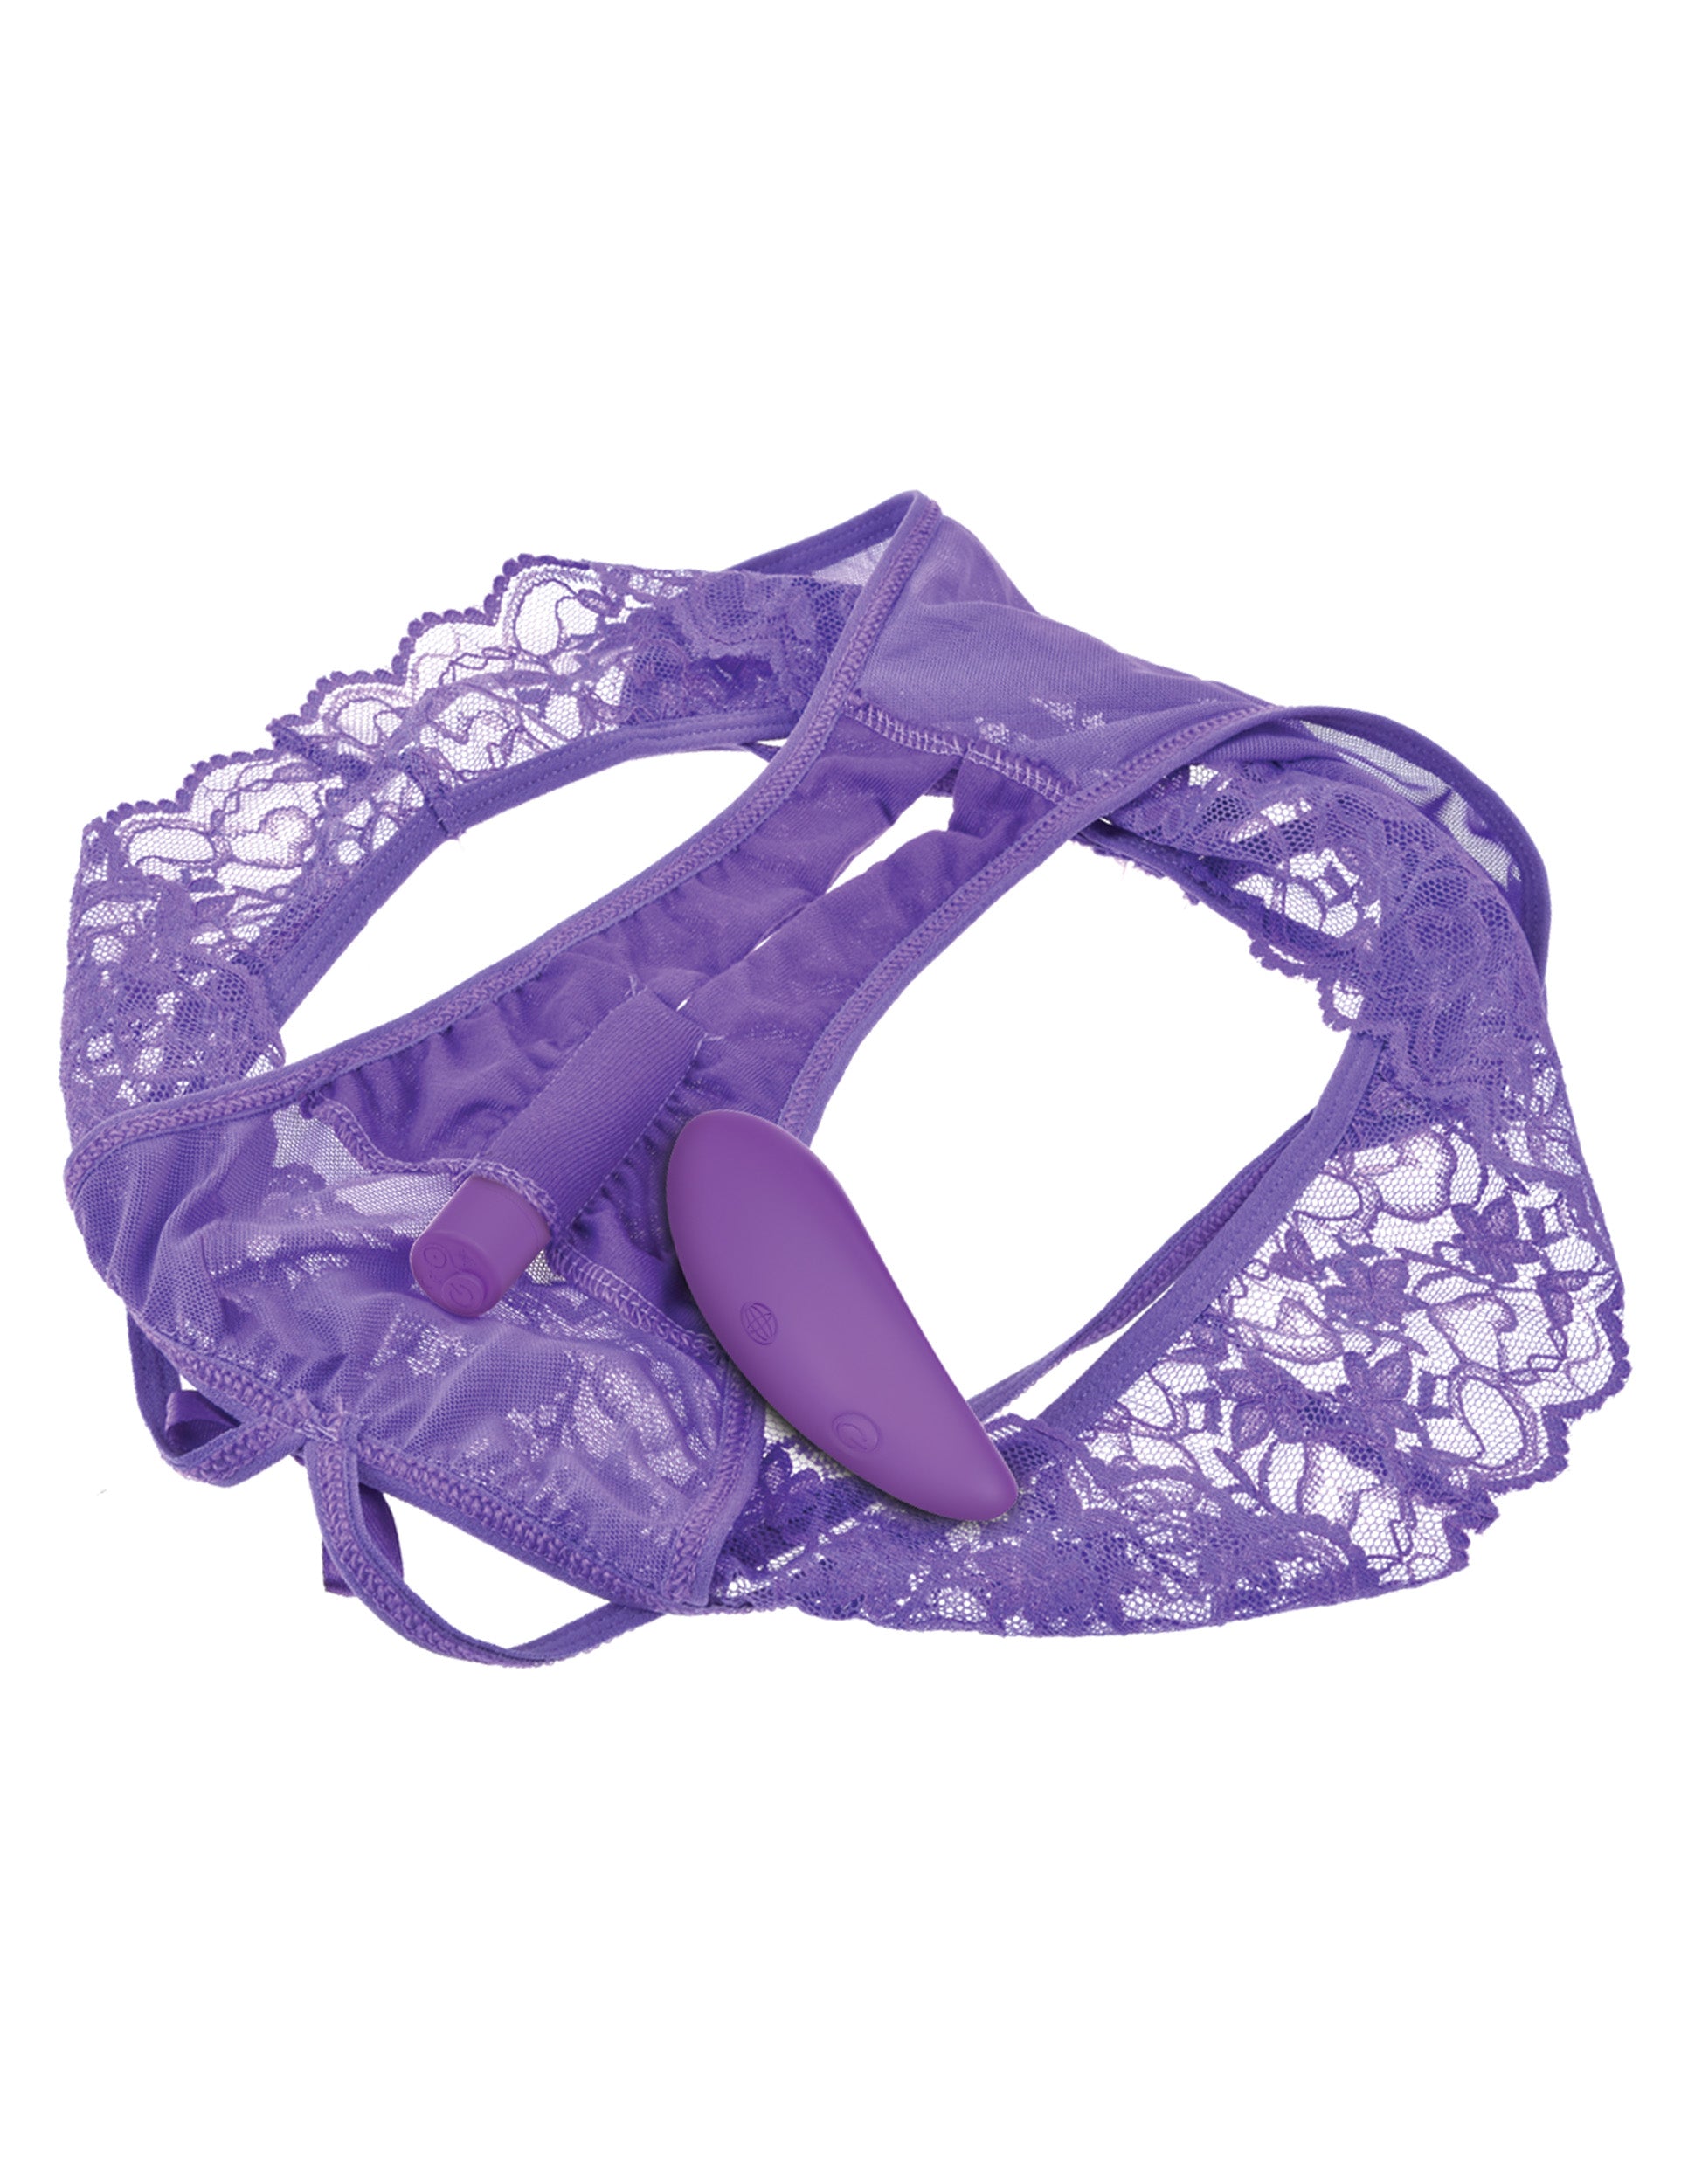 Fantasy For Her Crotchless Panty Thrill Her - Purple